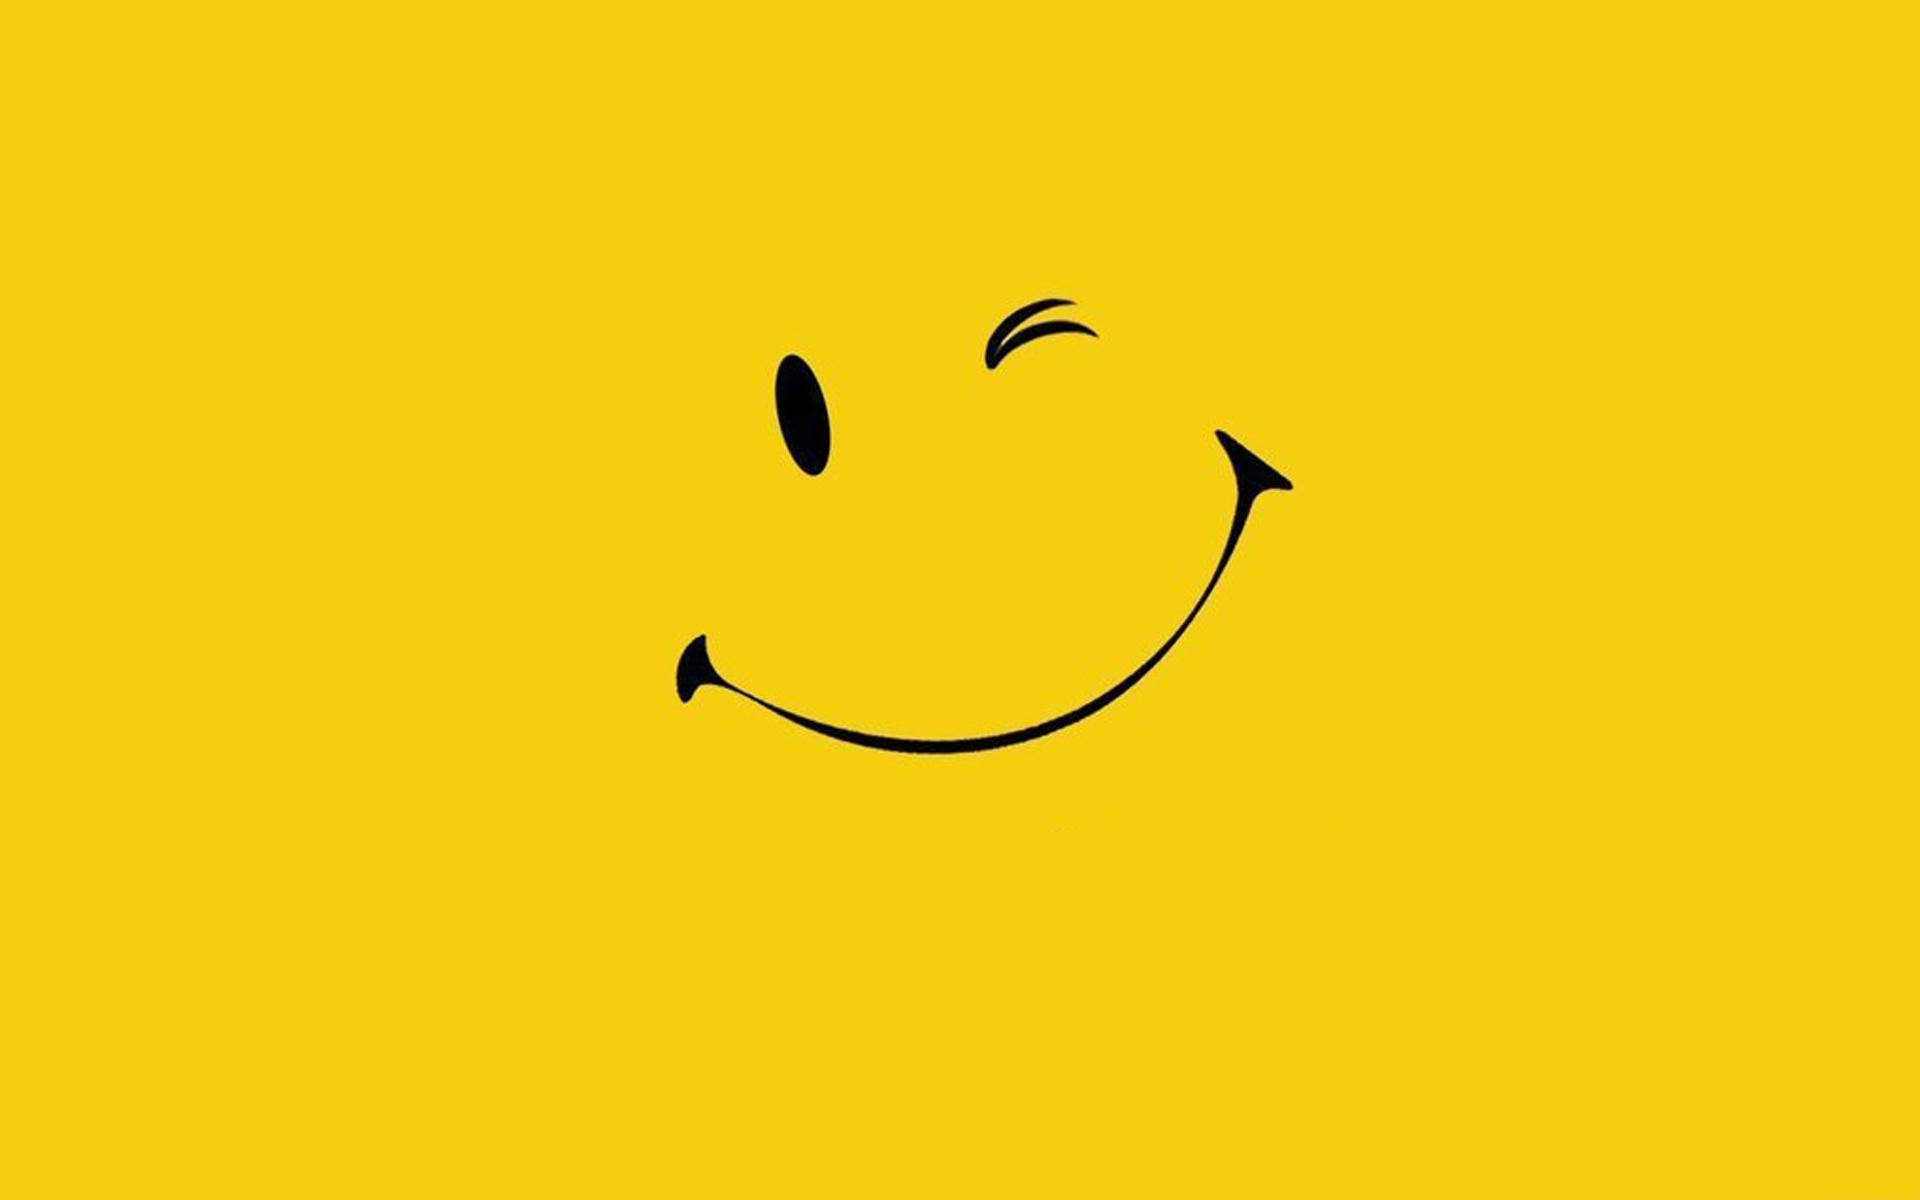 Smile Wallpapers